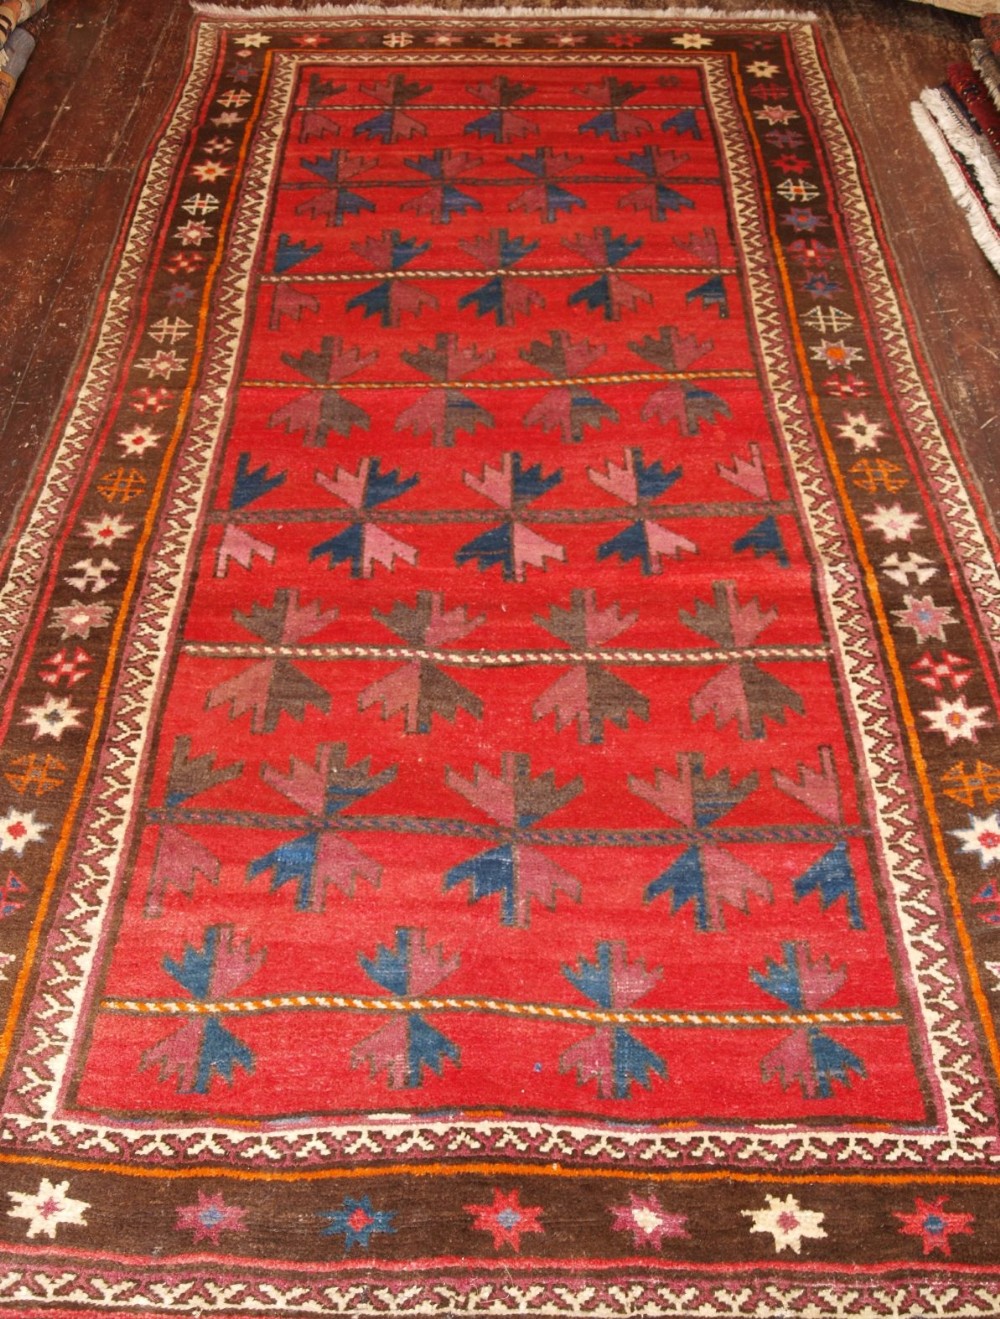 old afghan village rug unusual design great condition about 60 years old